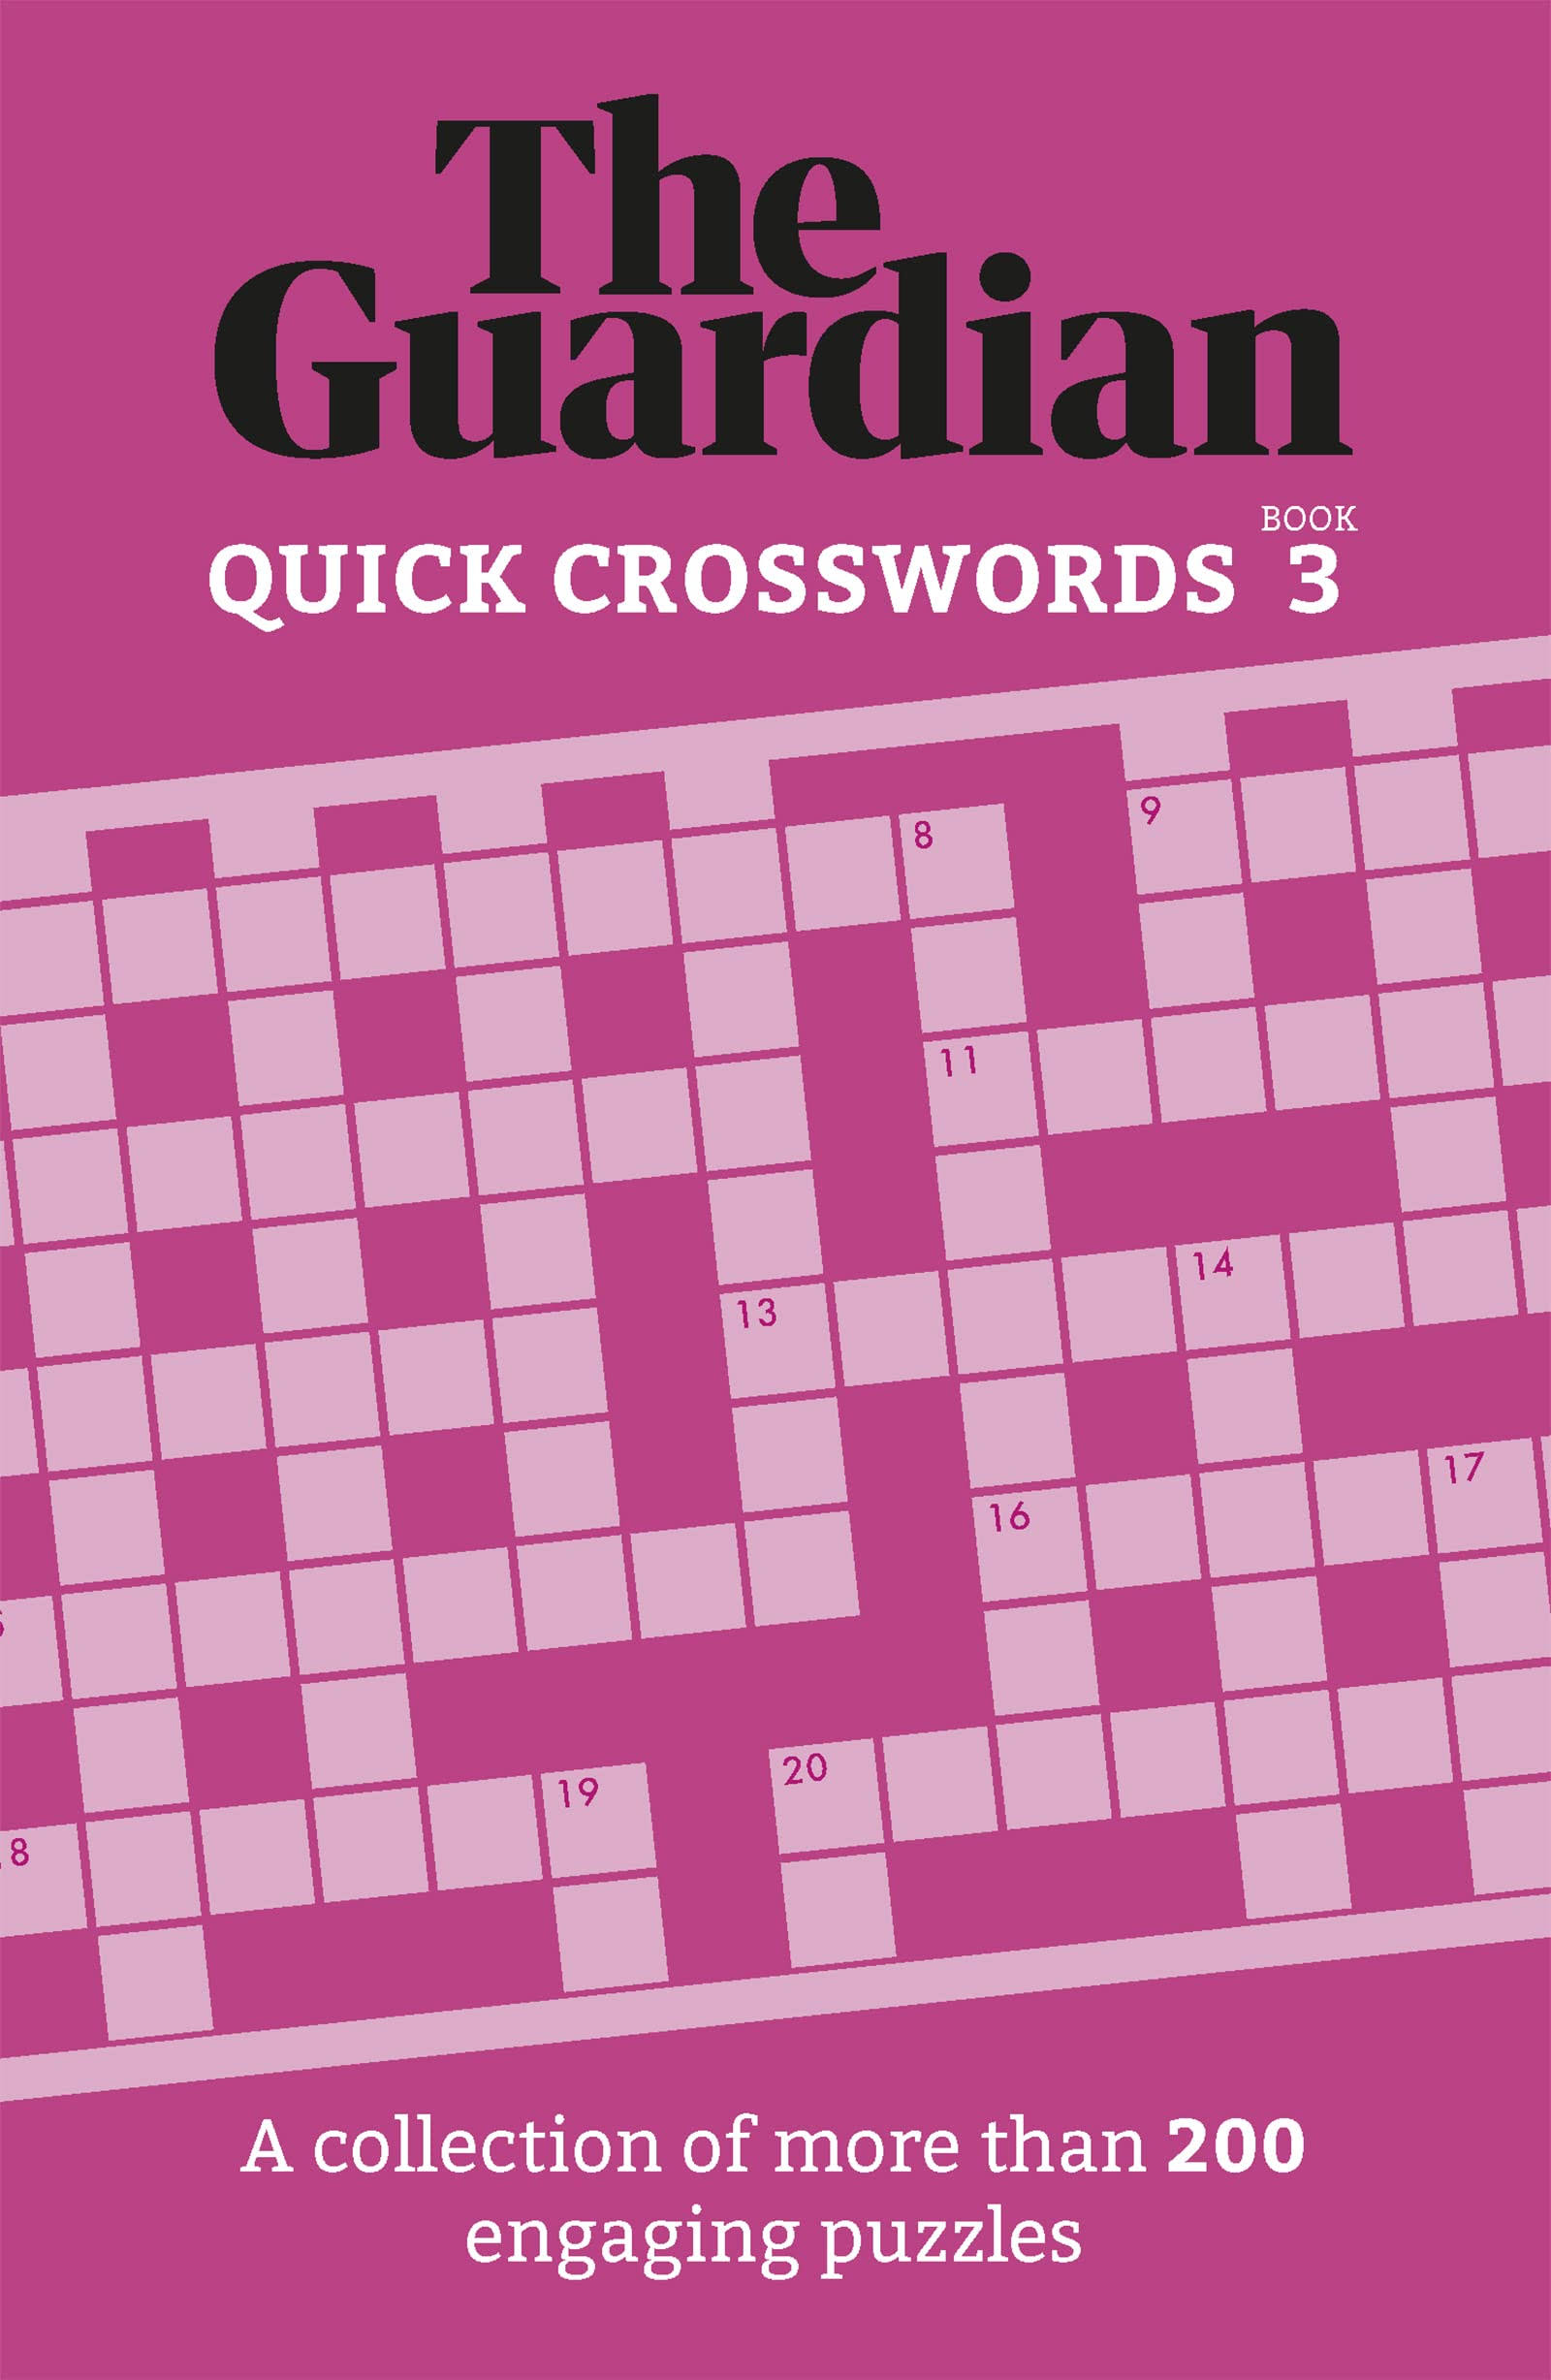 The Guardian Quick Crosswords 3 by The Guardian